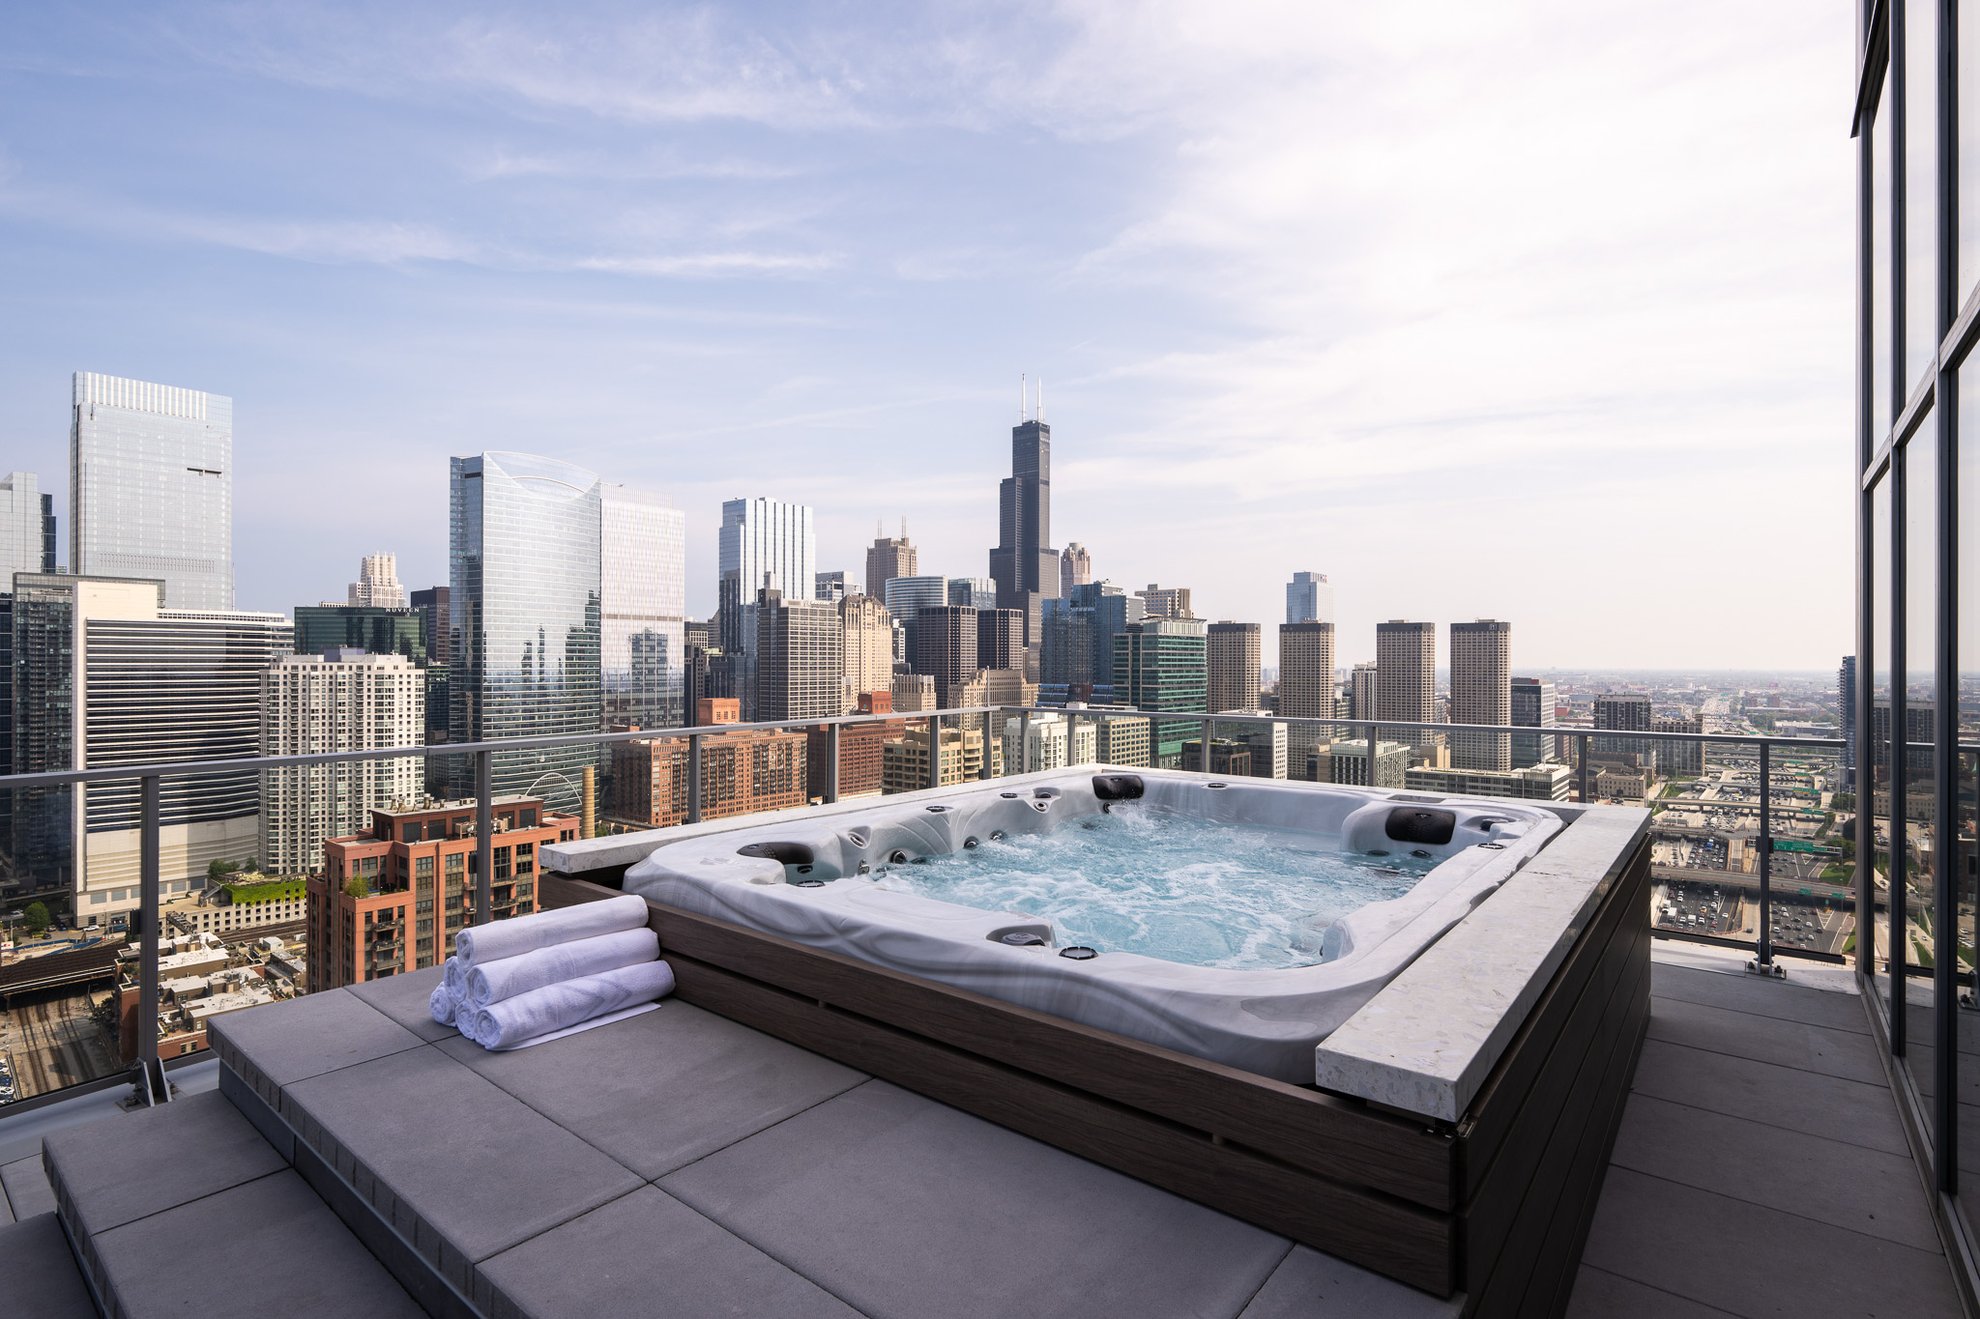 outdoor hot tub at the penthouse level chicago fulton market with chicago skyline view